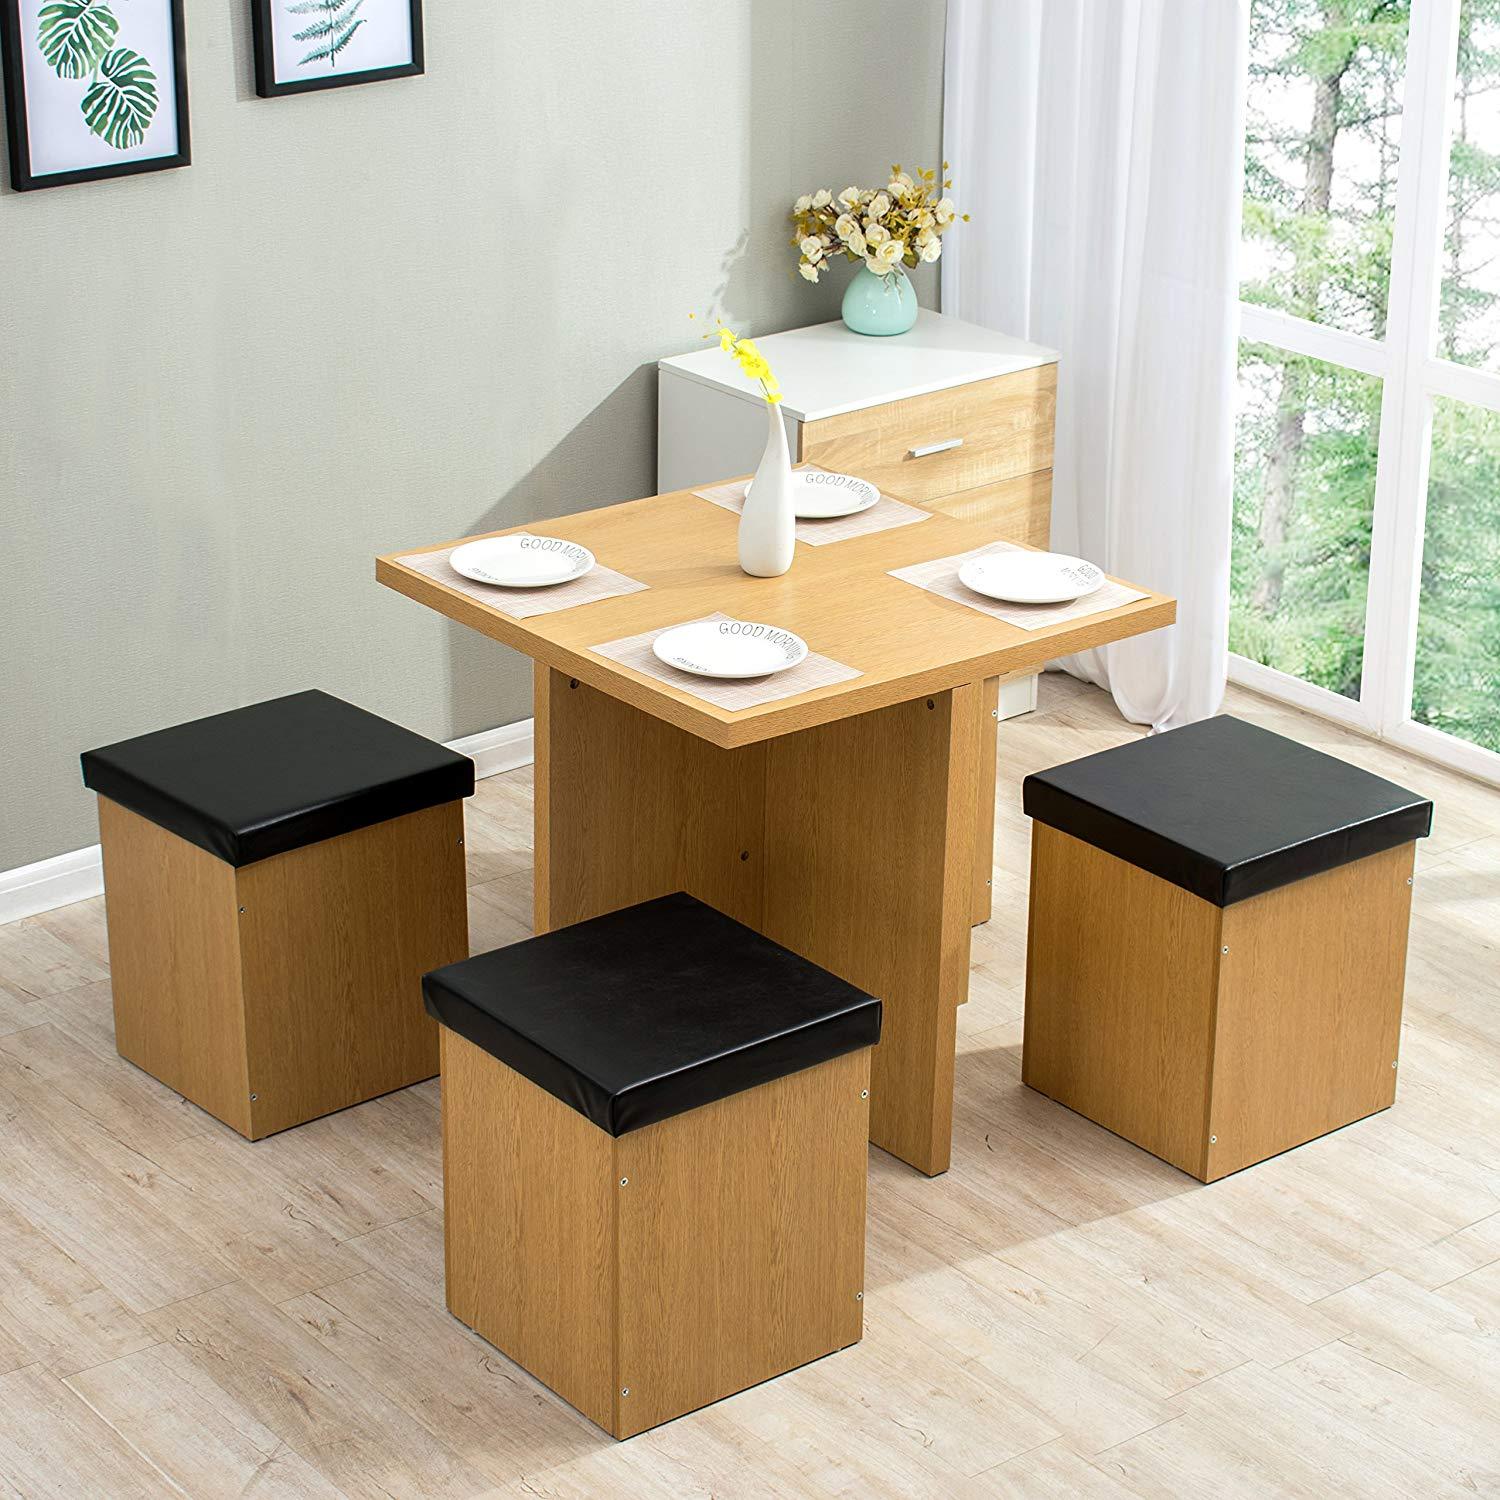 Wooden Dining Set with Small Chairs